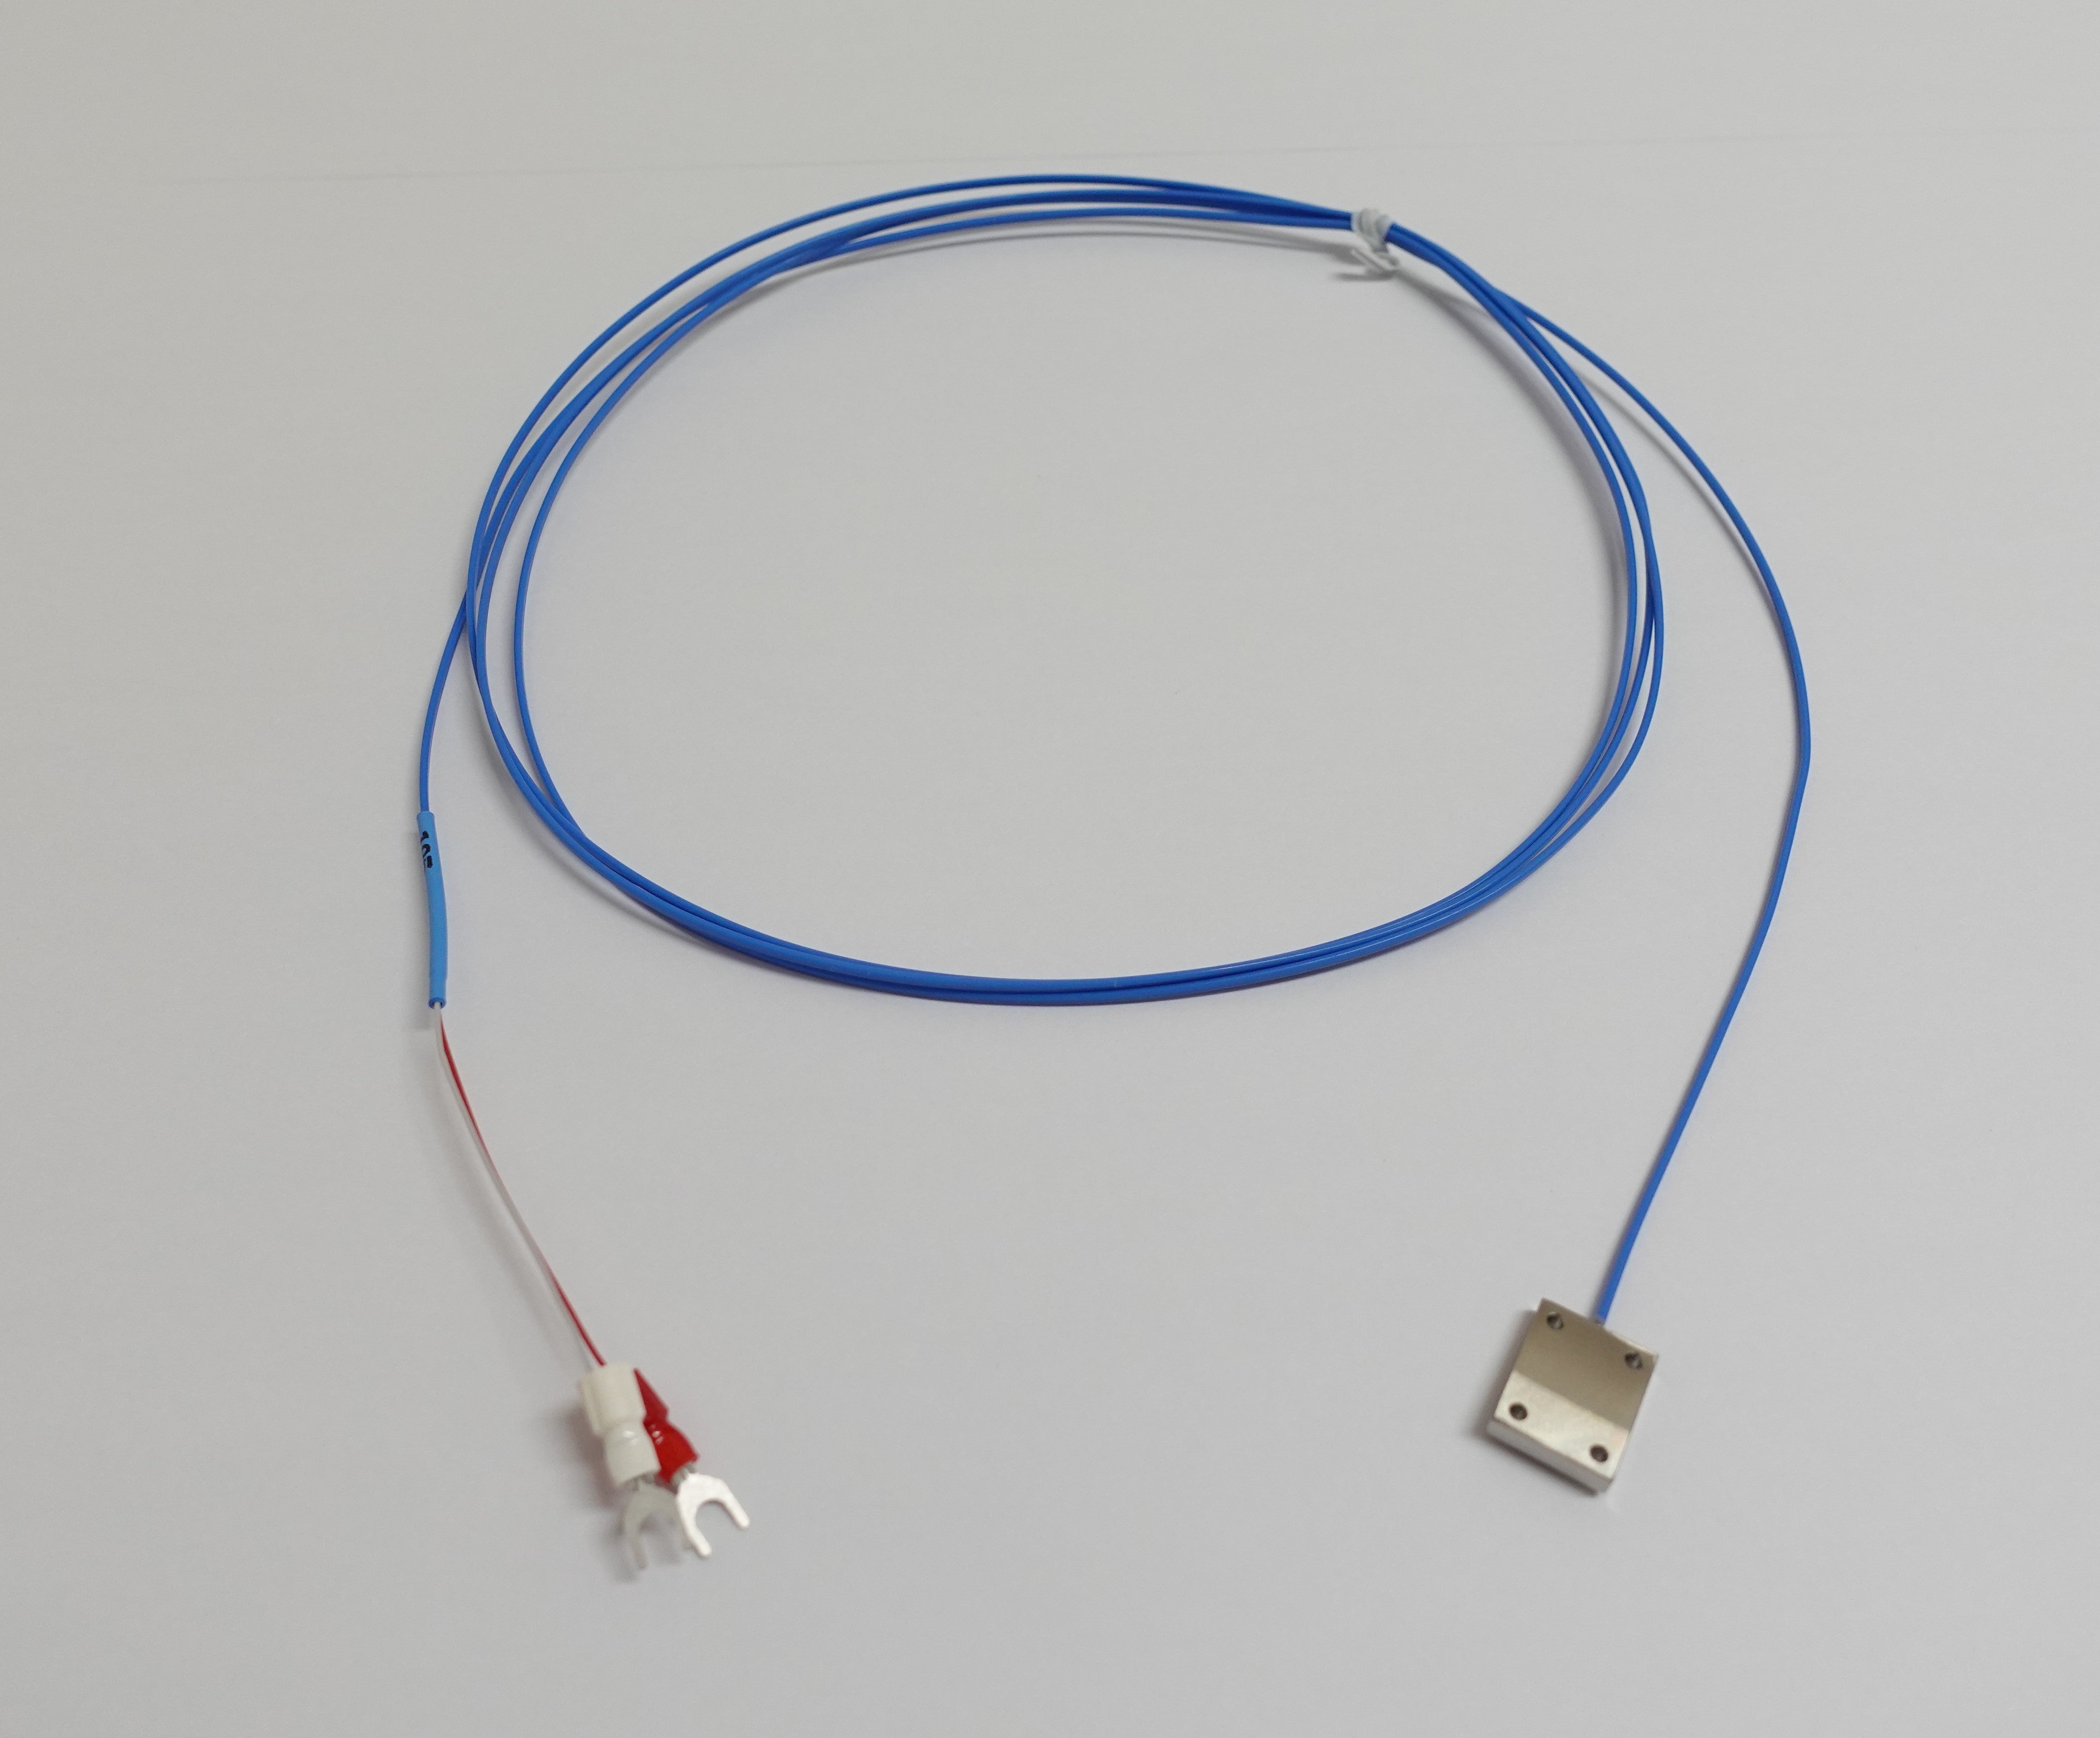 Temperature Sensor with Thermocouple (K Type) "Screwing Stick Type" Max. operating temp: 200°C, Tolerance: Class 2 (±2.5°C or ±0.75%)